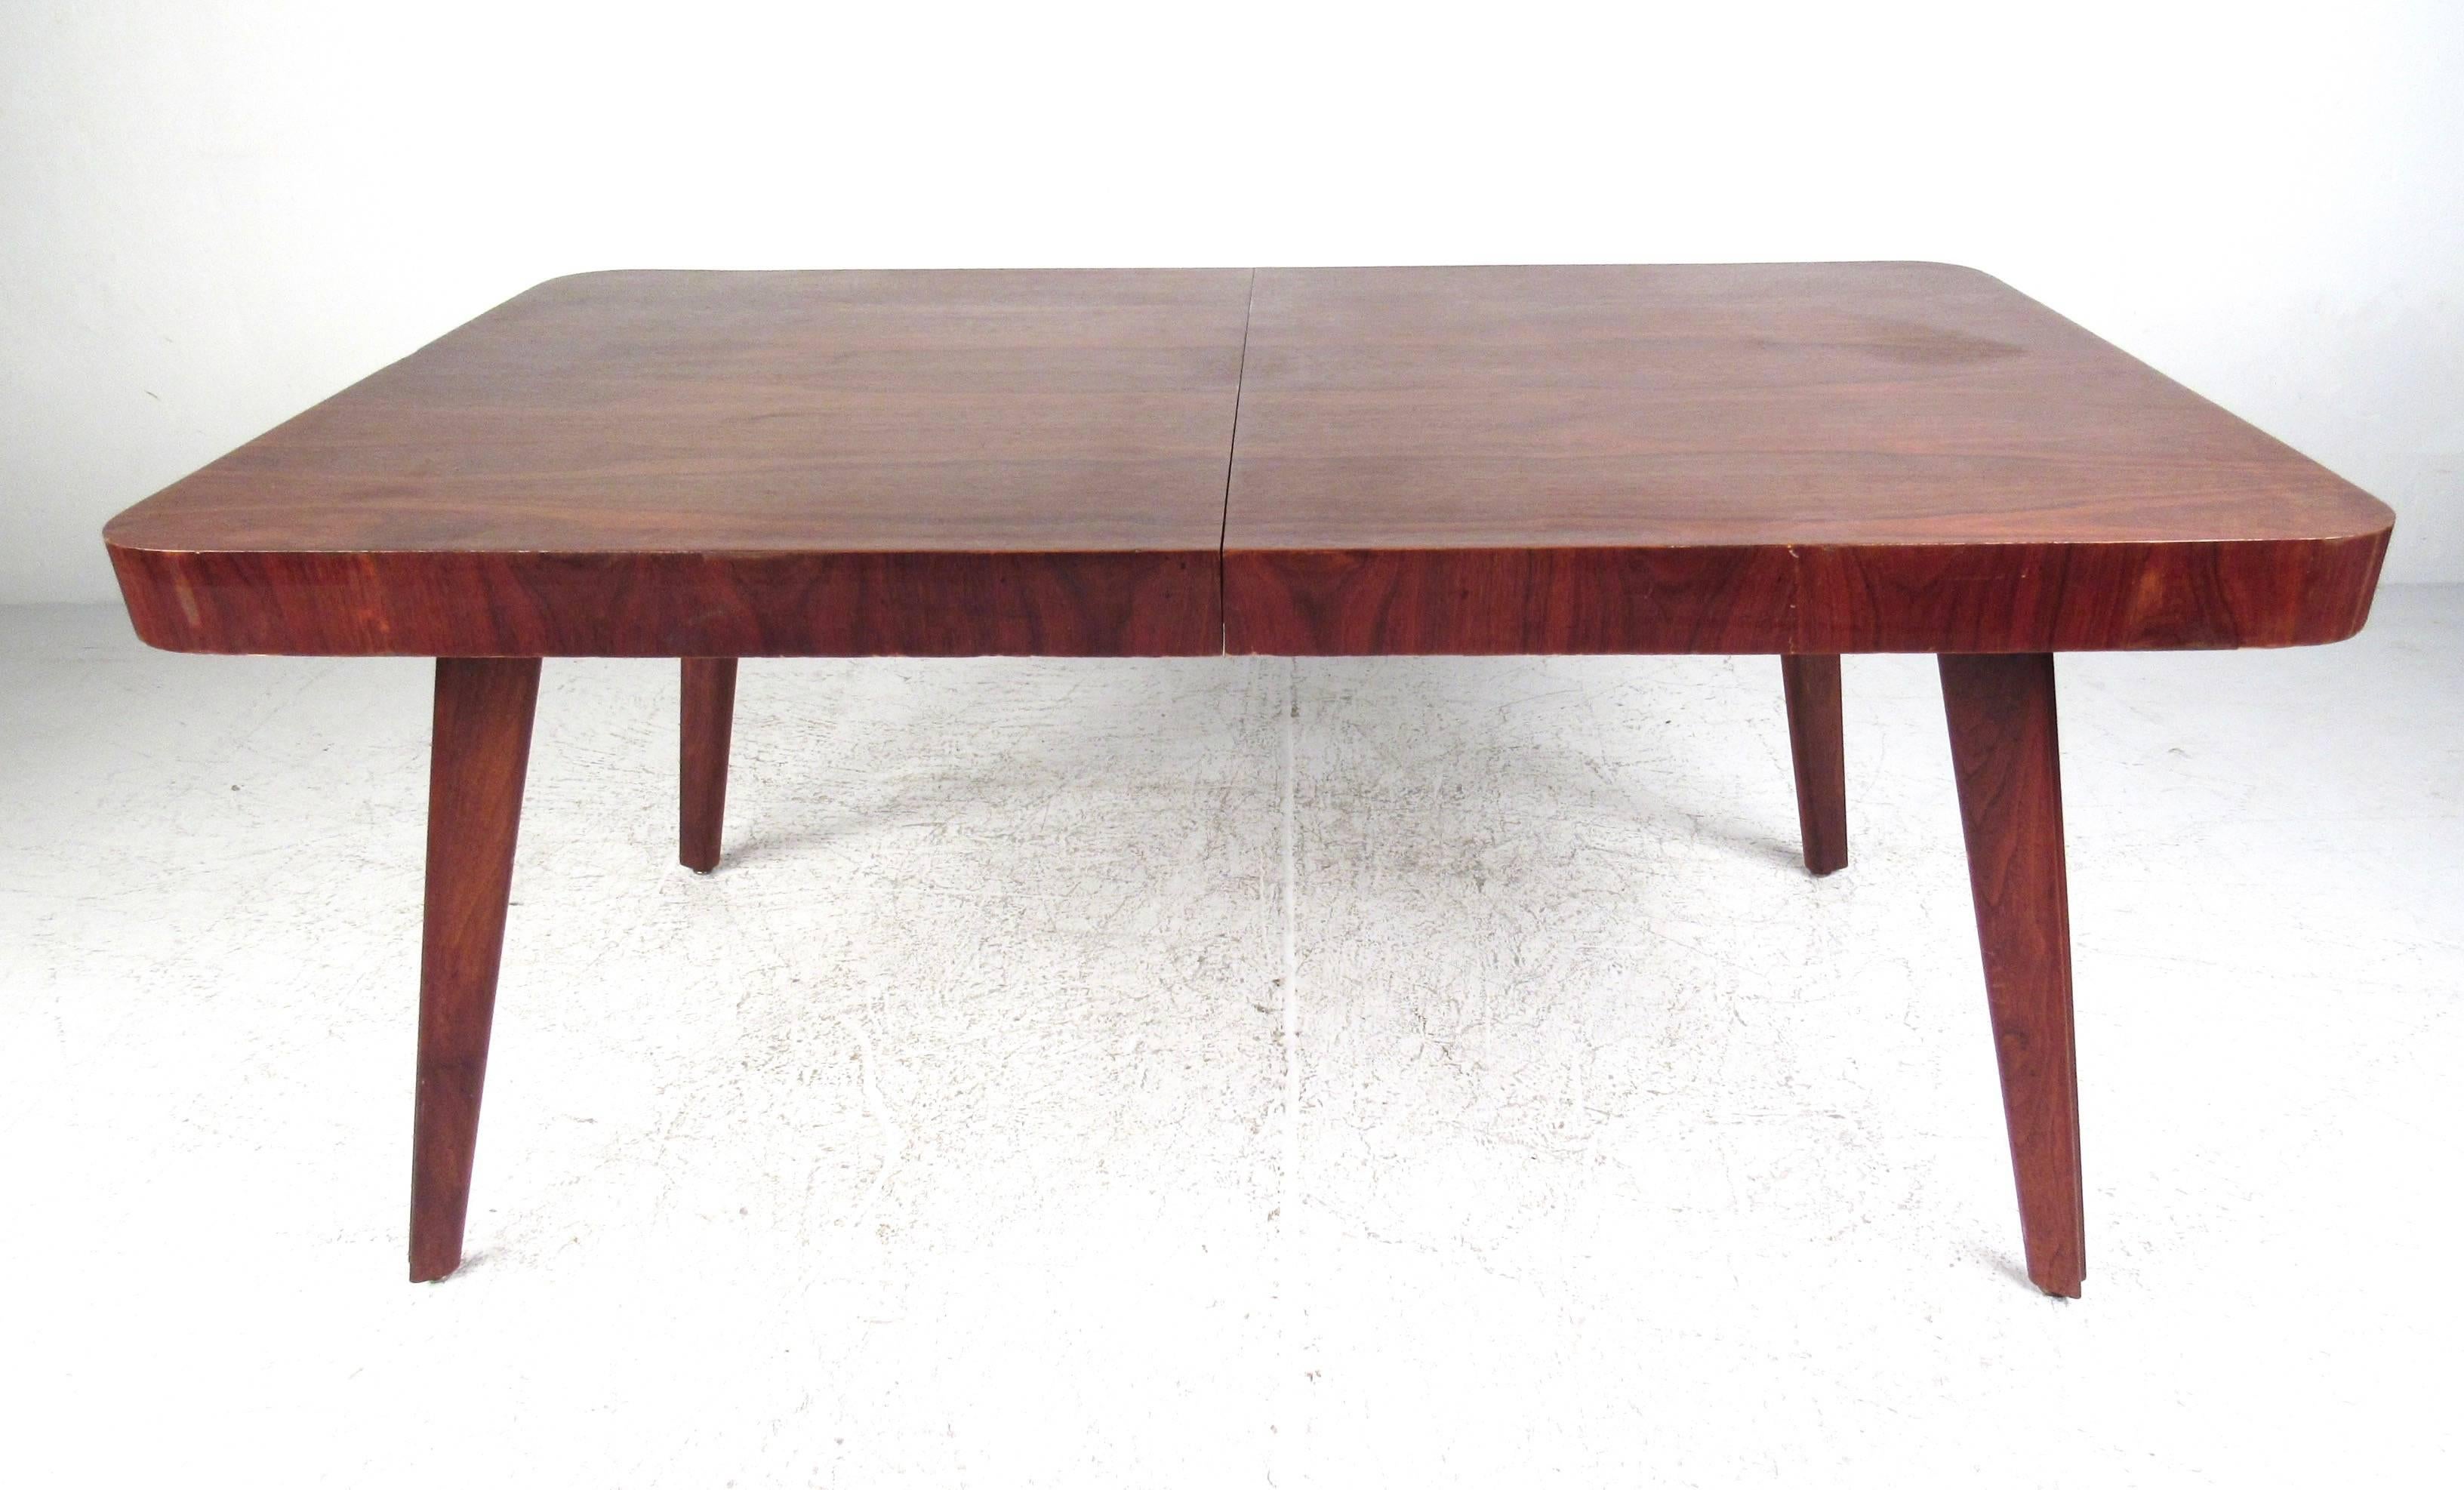 This uniquely sized vintage dining table comes matched with a set of six vintage dining chairs. Wonderful Mid-Century design exemplified with the stunning sculpted legs shared by both table and chairs. Comfortable seats for dining room use, perfect